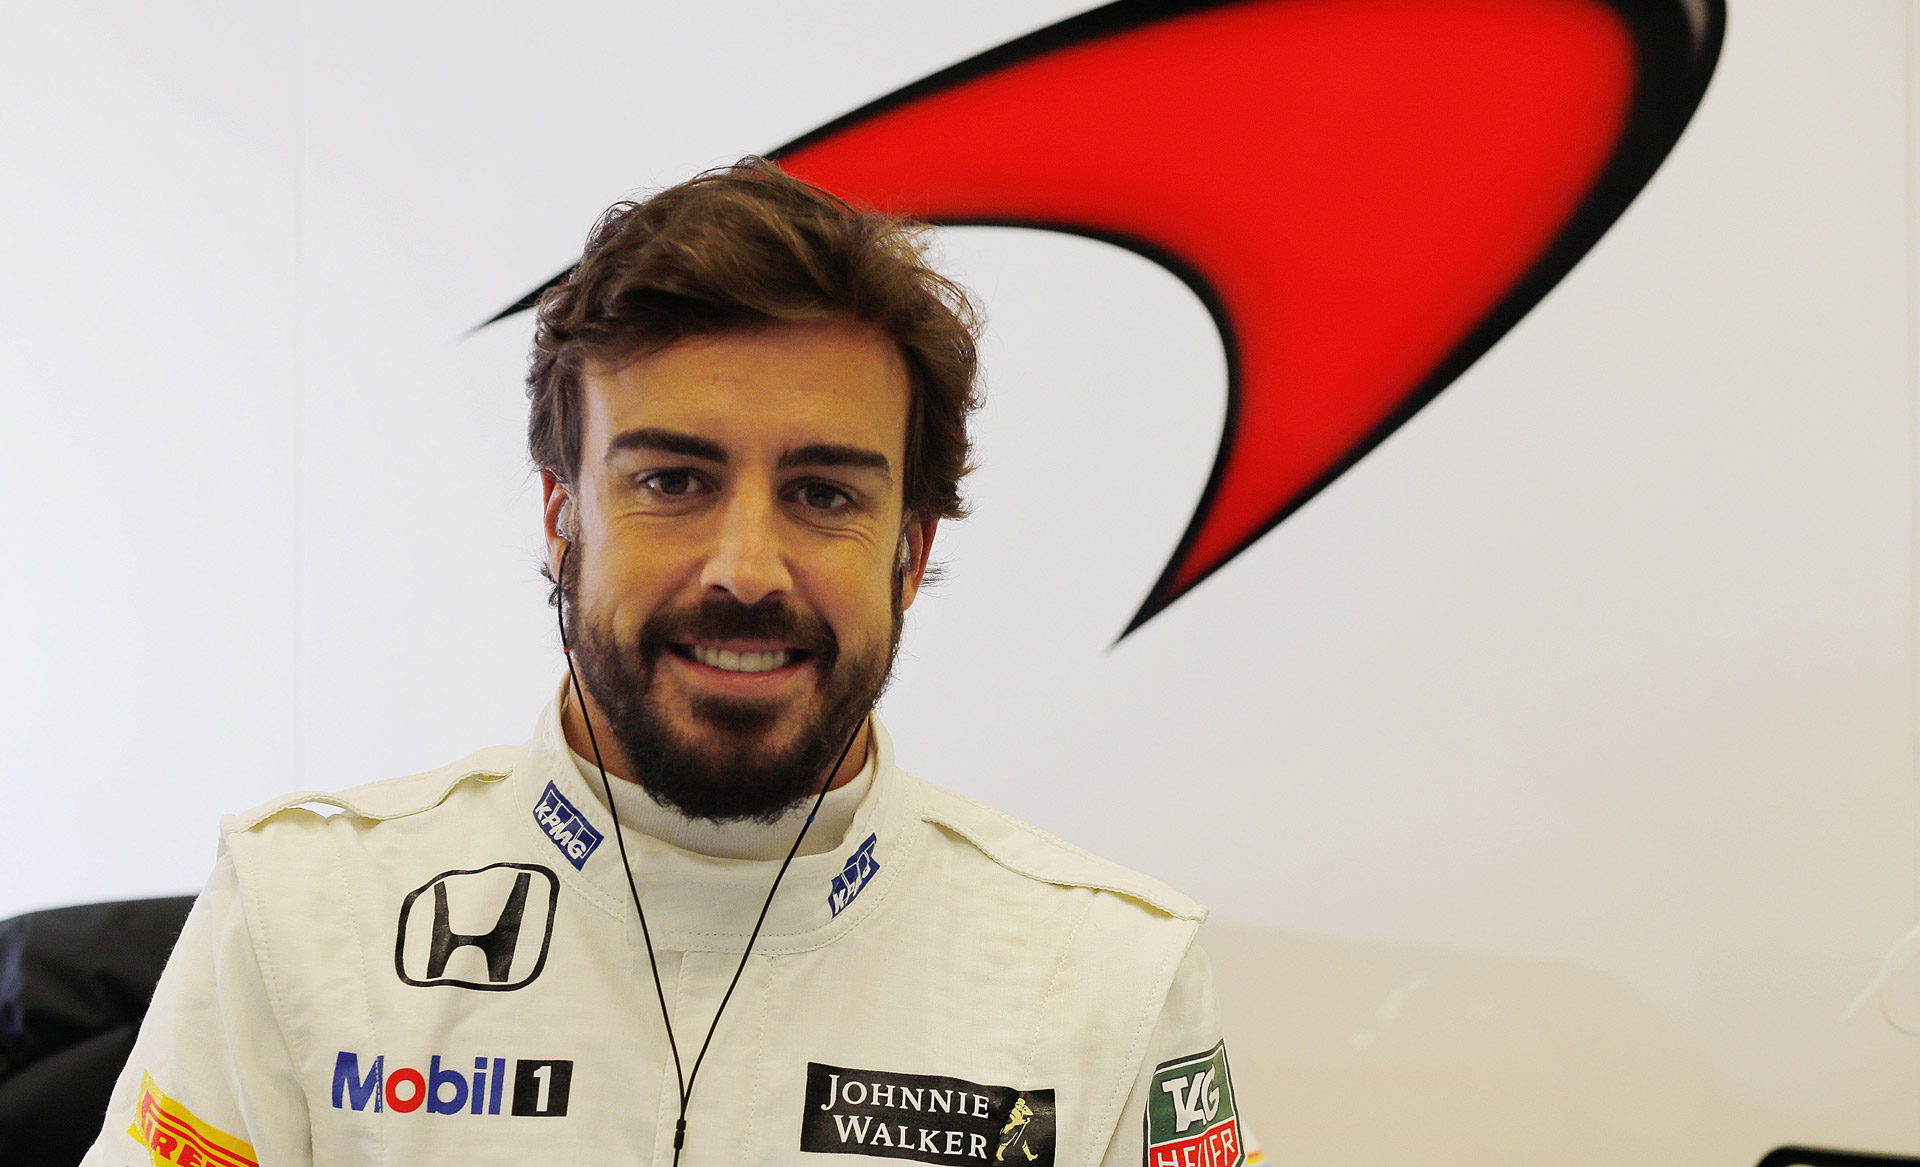 Amazing Fernando Alonso Pictures & Backgrounds